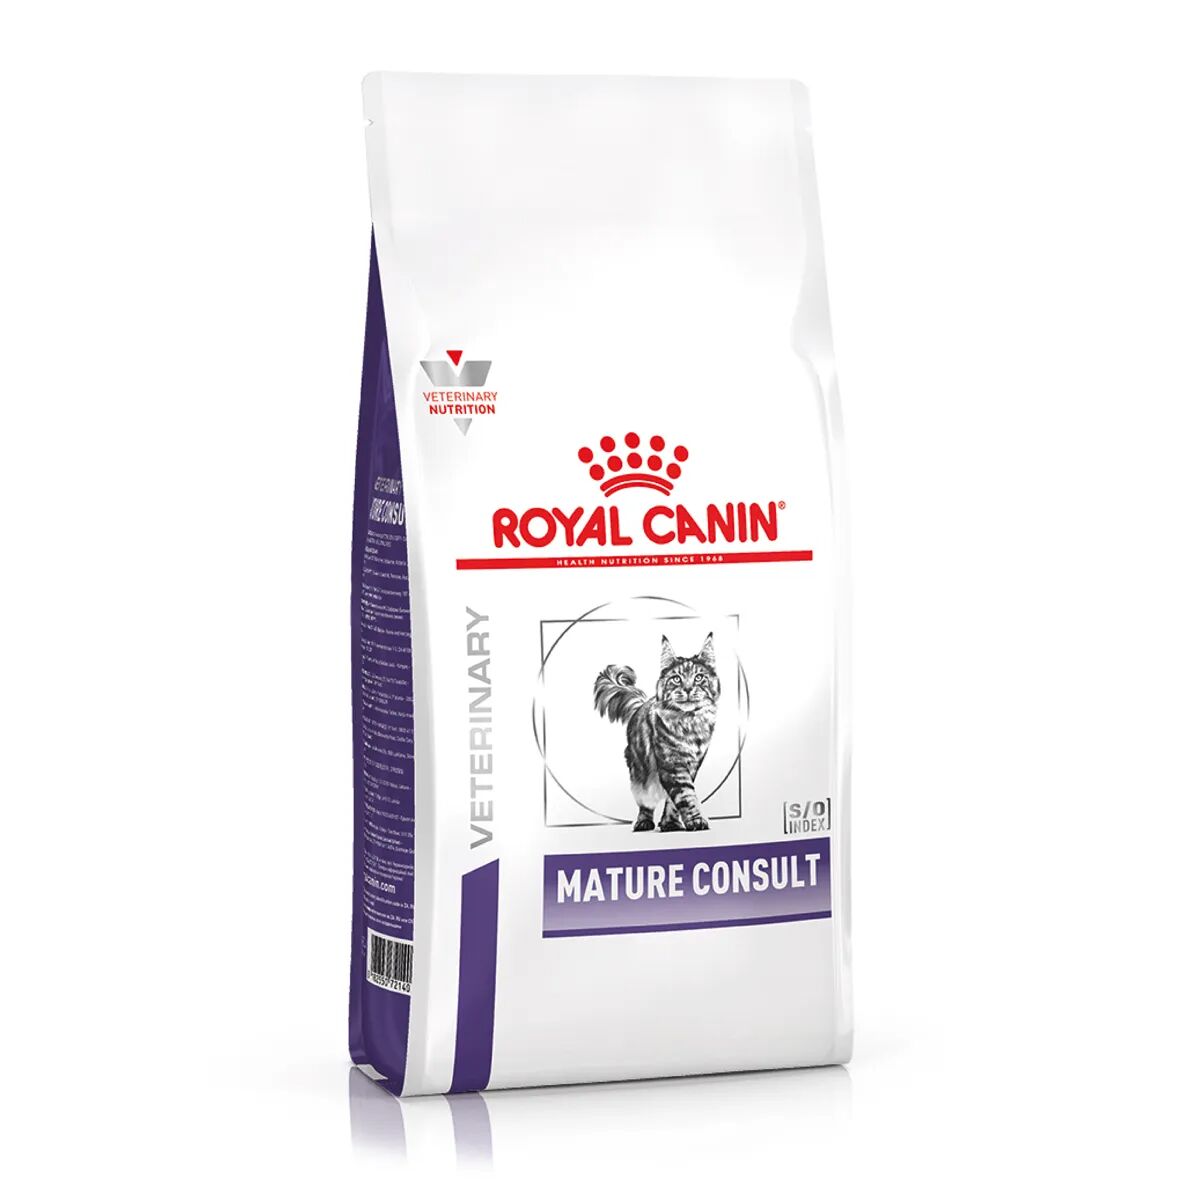 ROYAL CANIN Expert Mature Consult Gatto 1.5KG